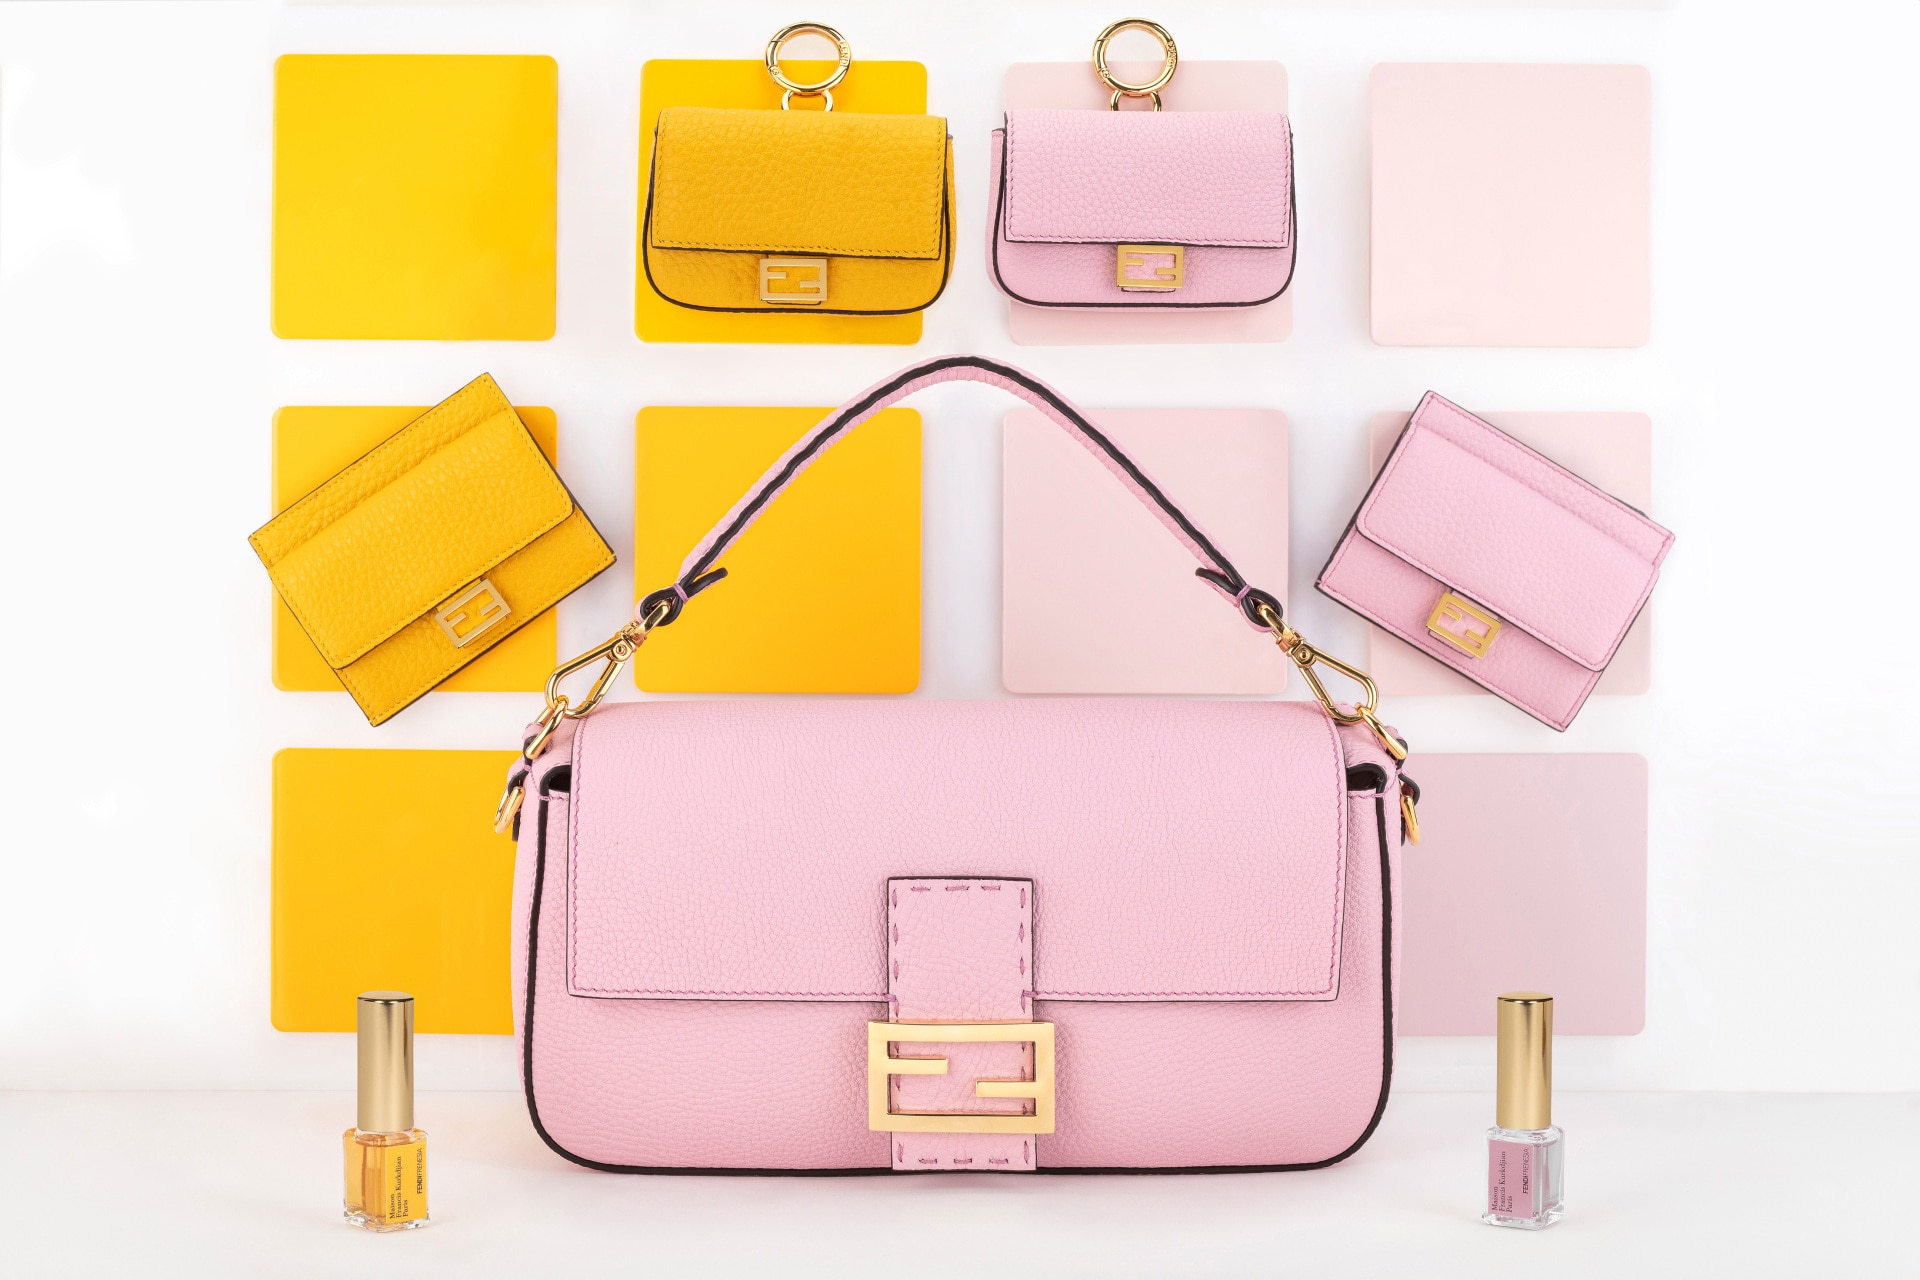 Francis Kurkdjian and Fendi Partner to Create Perfumed Leather Handbags:  “Scent Hits the Brain with No Filter”